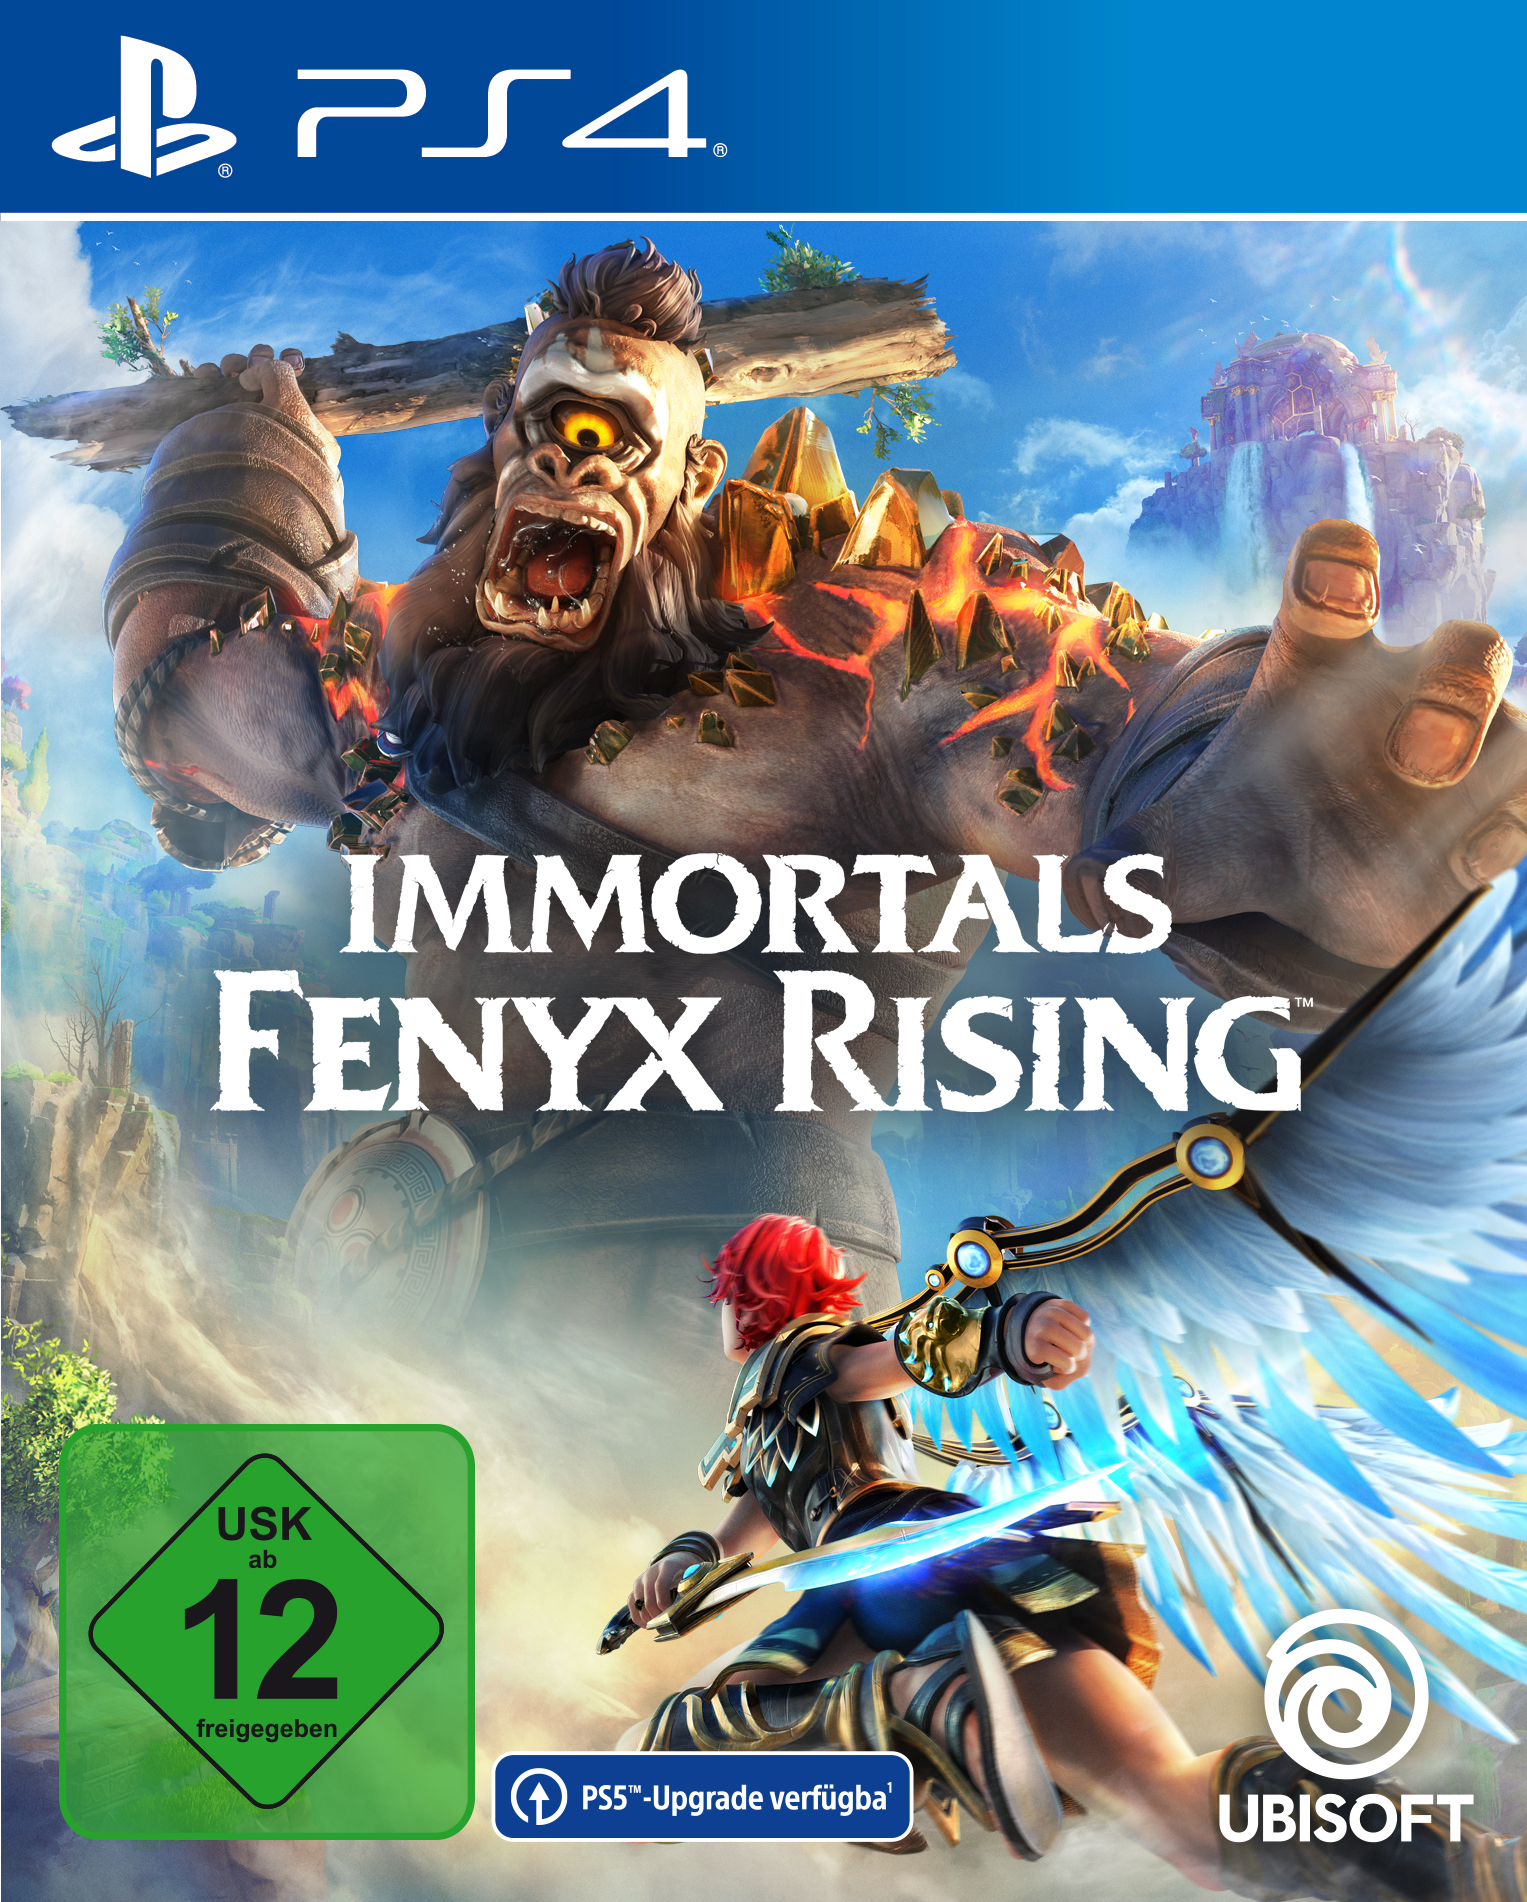 Featured image for “Immortals Fenyx Rising”